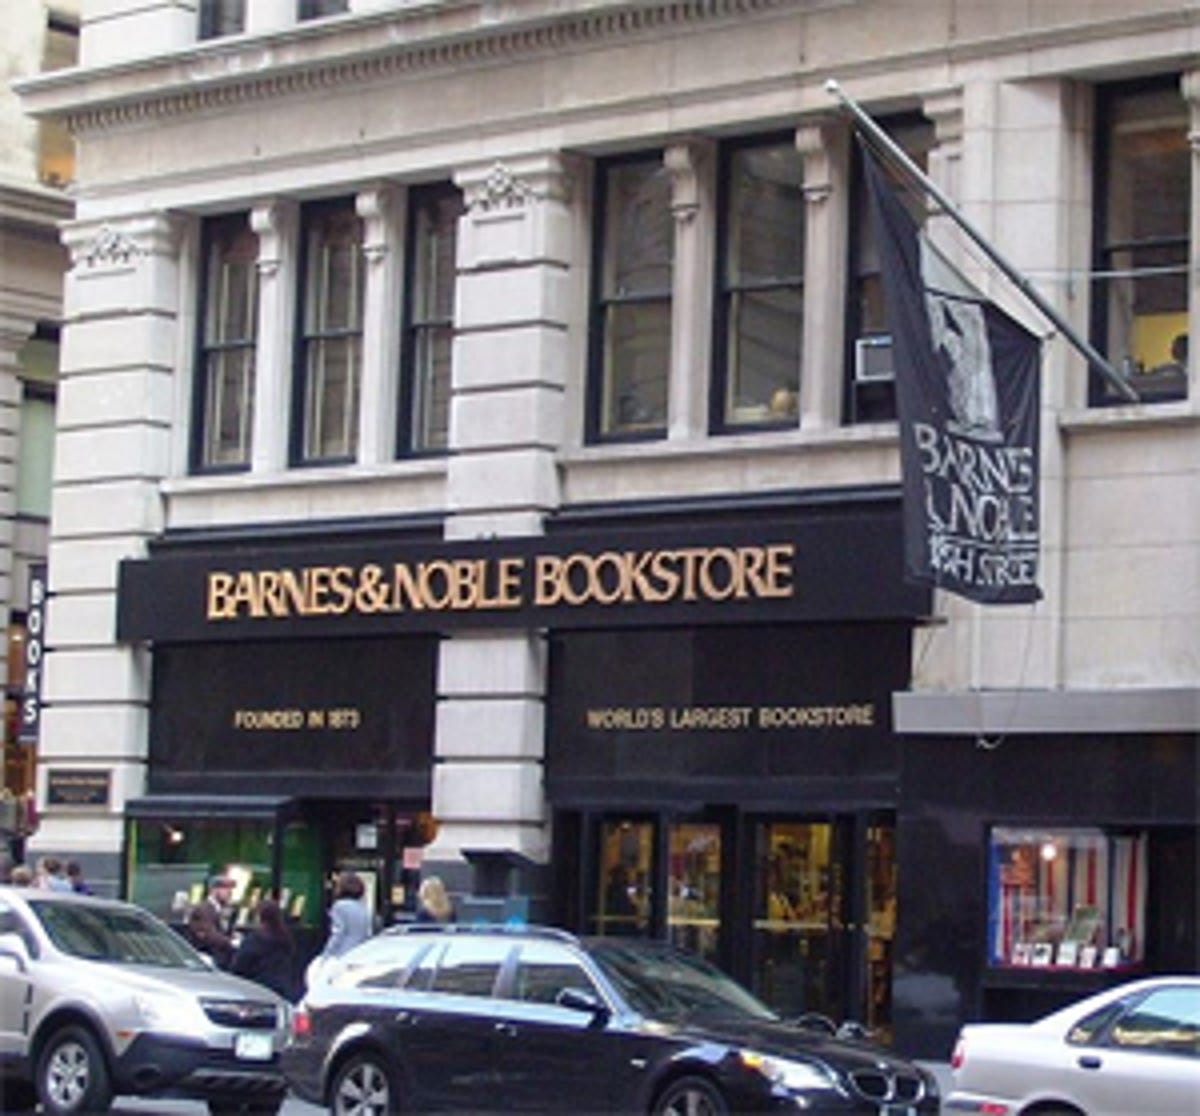 Barnes & Noble's flagship store on New York's Fifth Avenue